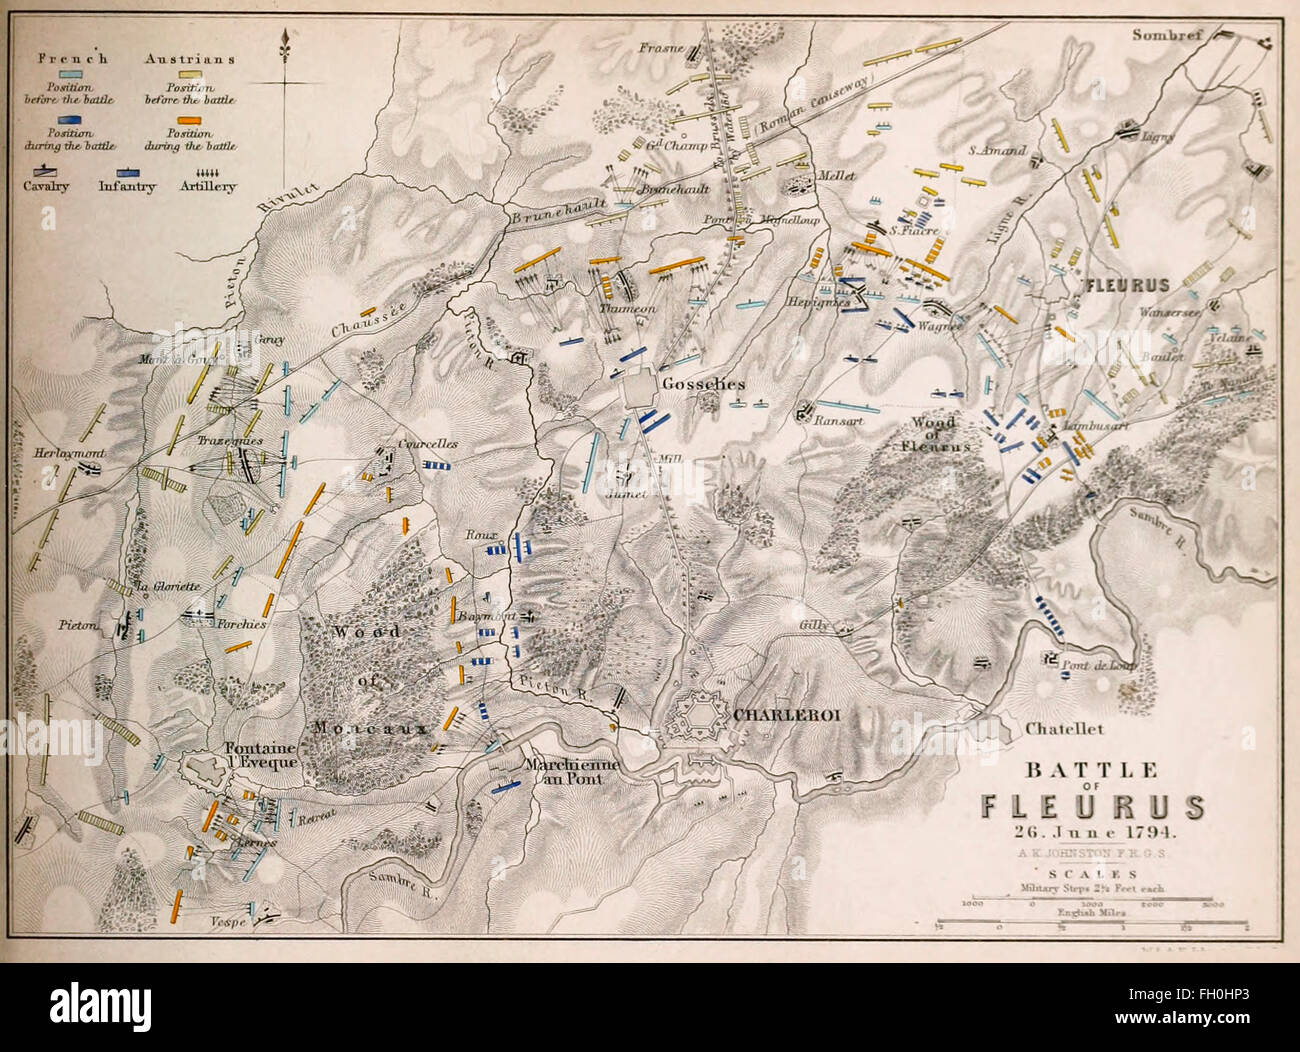 The Battle of Fleurus, on 26 June 1794, was a major engagement between the army of the First French Republic, under General Jean-Baptiste Jourdan, and the Coalition Army (Great Britain, Hanover, Dutch Republic, and Habsburg Monarchy), commanded by Prince Josias of Coburg, in the most decisive battle of the Flanders Campaign in the Low Countries during the French Revolutionary Wars. Stock Photo